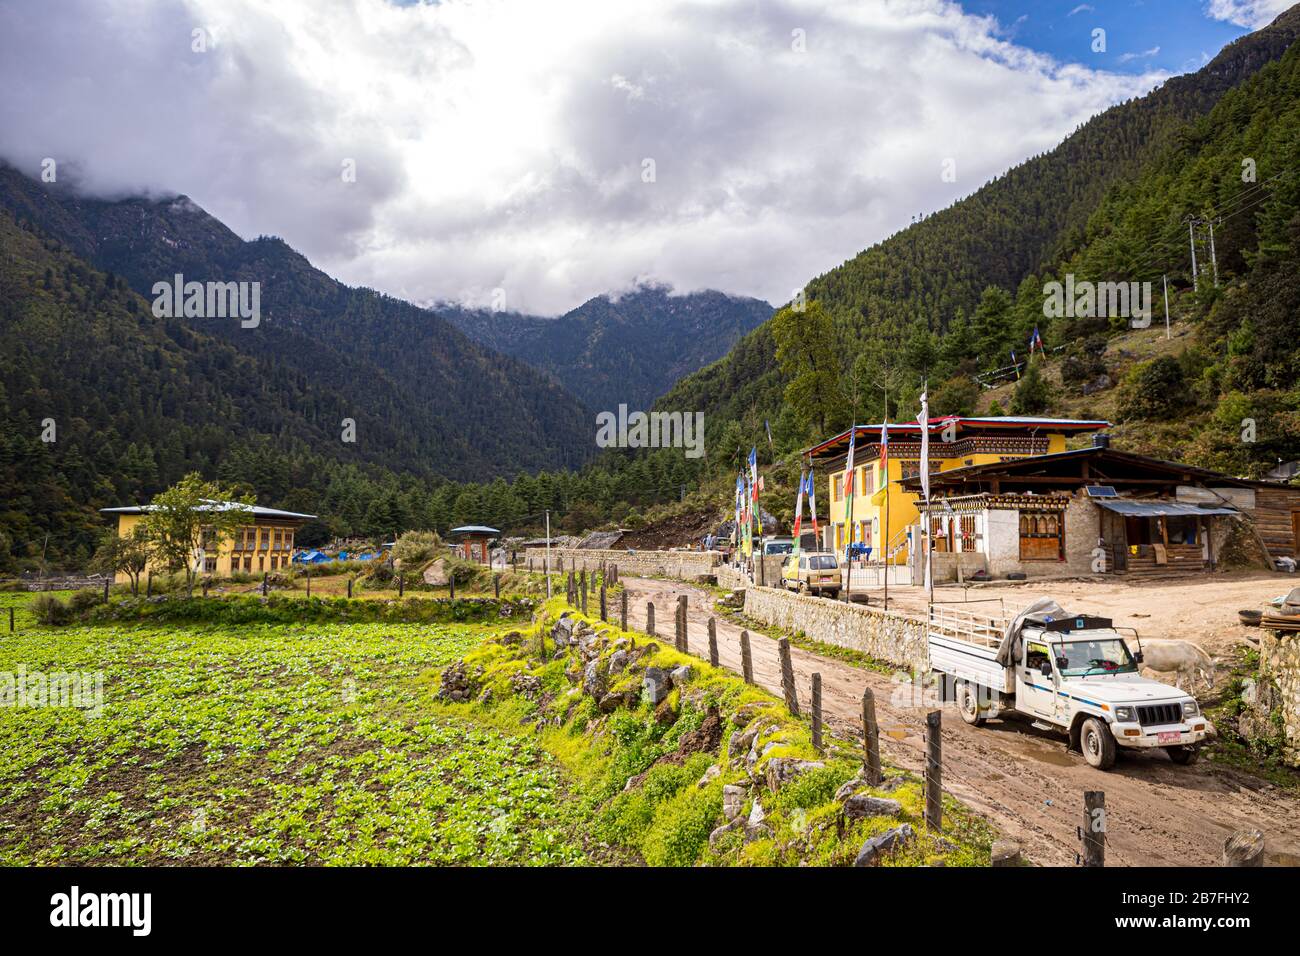 A pickup truck at the end of the dirt road near a trailhead in the small village of Shana, Bhutan Stock Photo